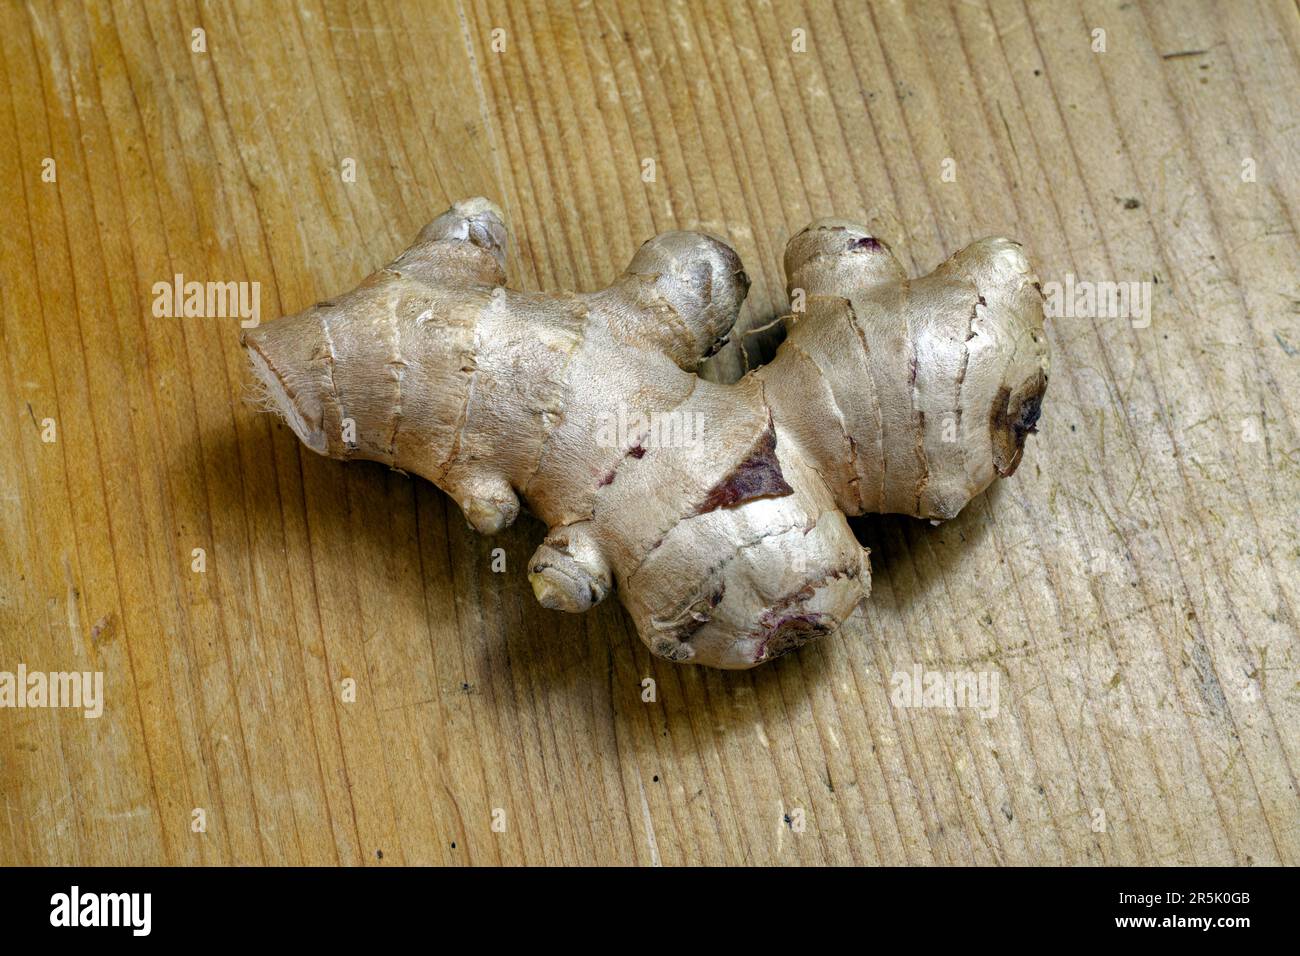 Kitchen ingredients, spice: root of ginger, isolated Stock Photo